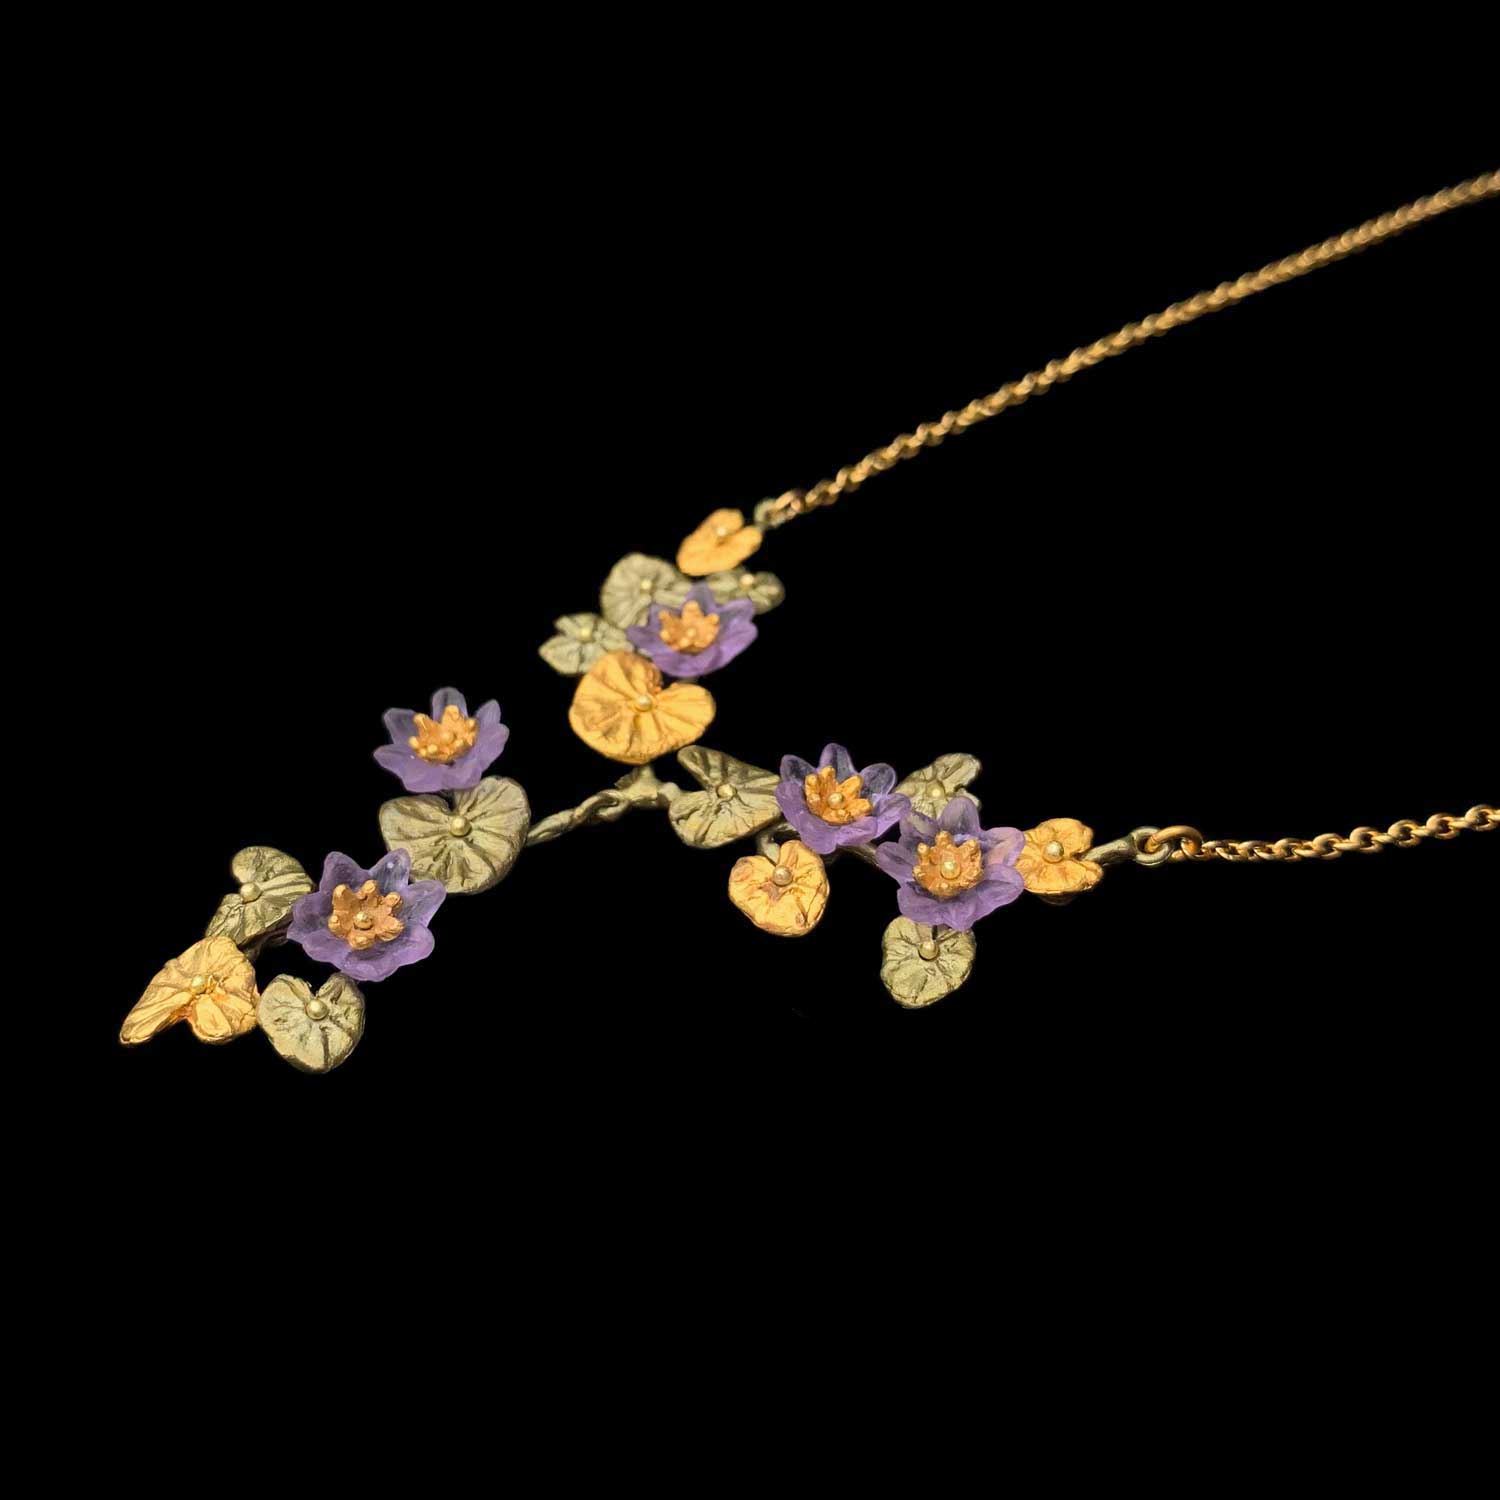 Giverny Water Lilies Necklace